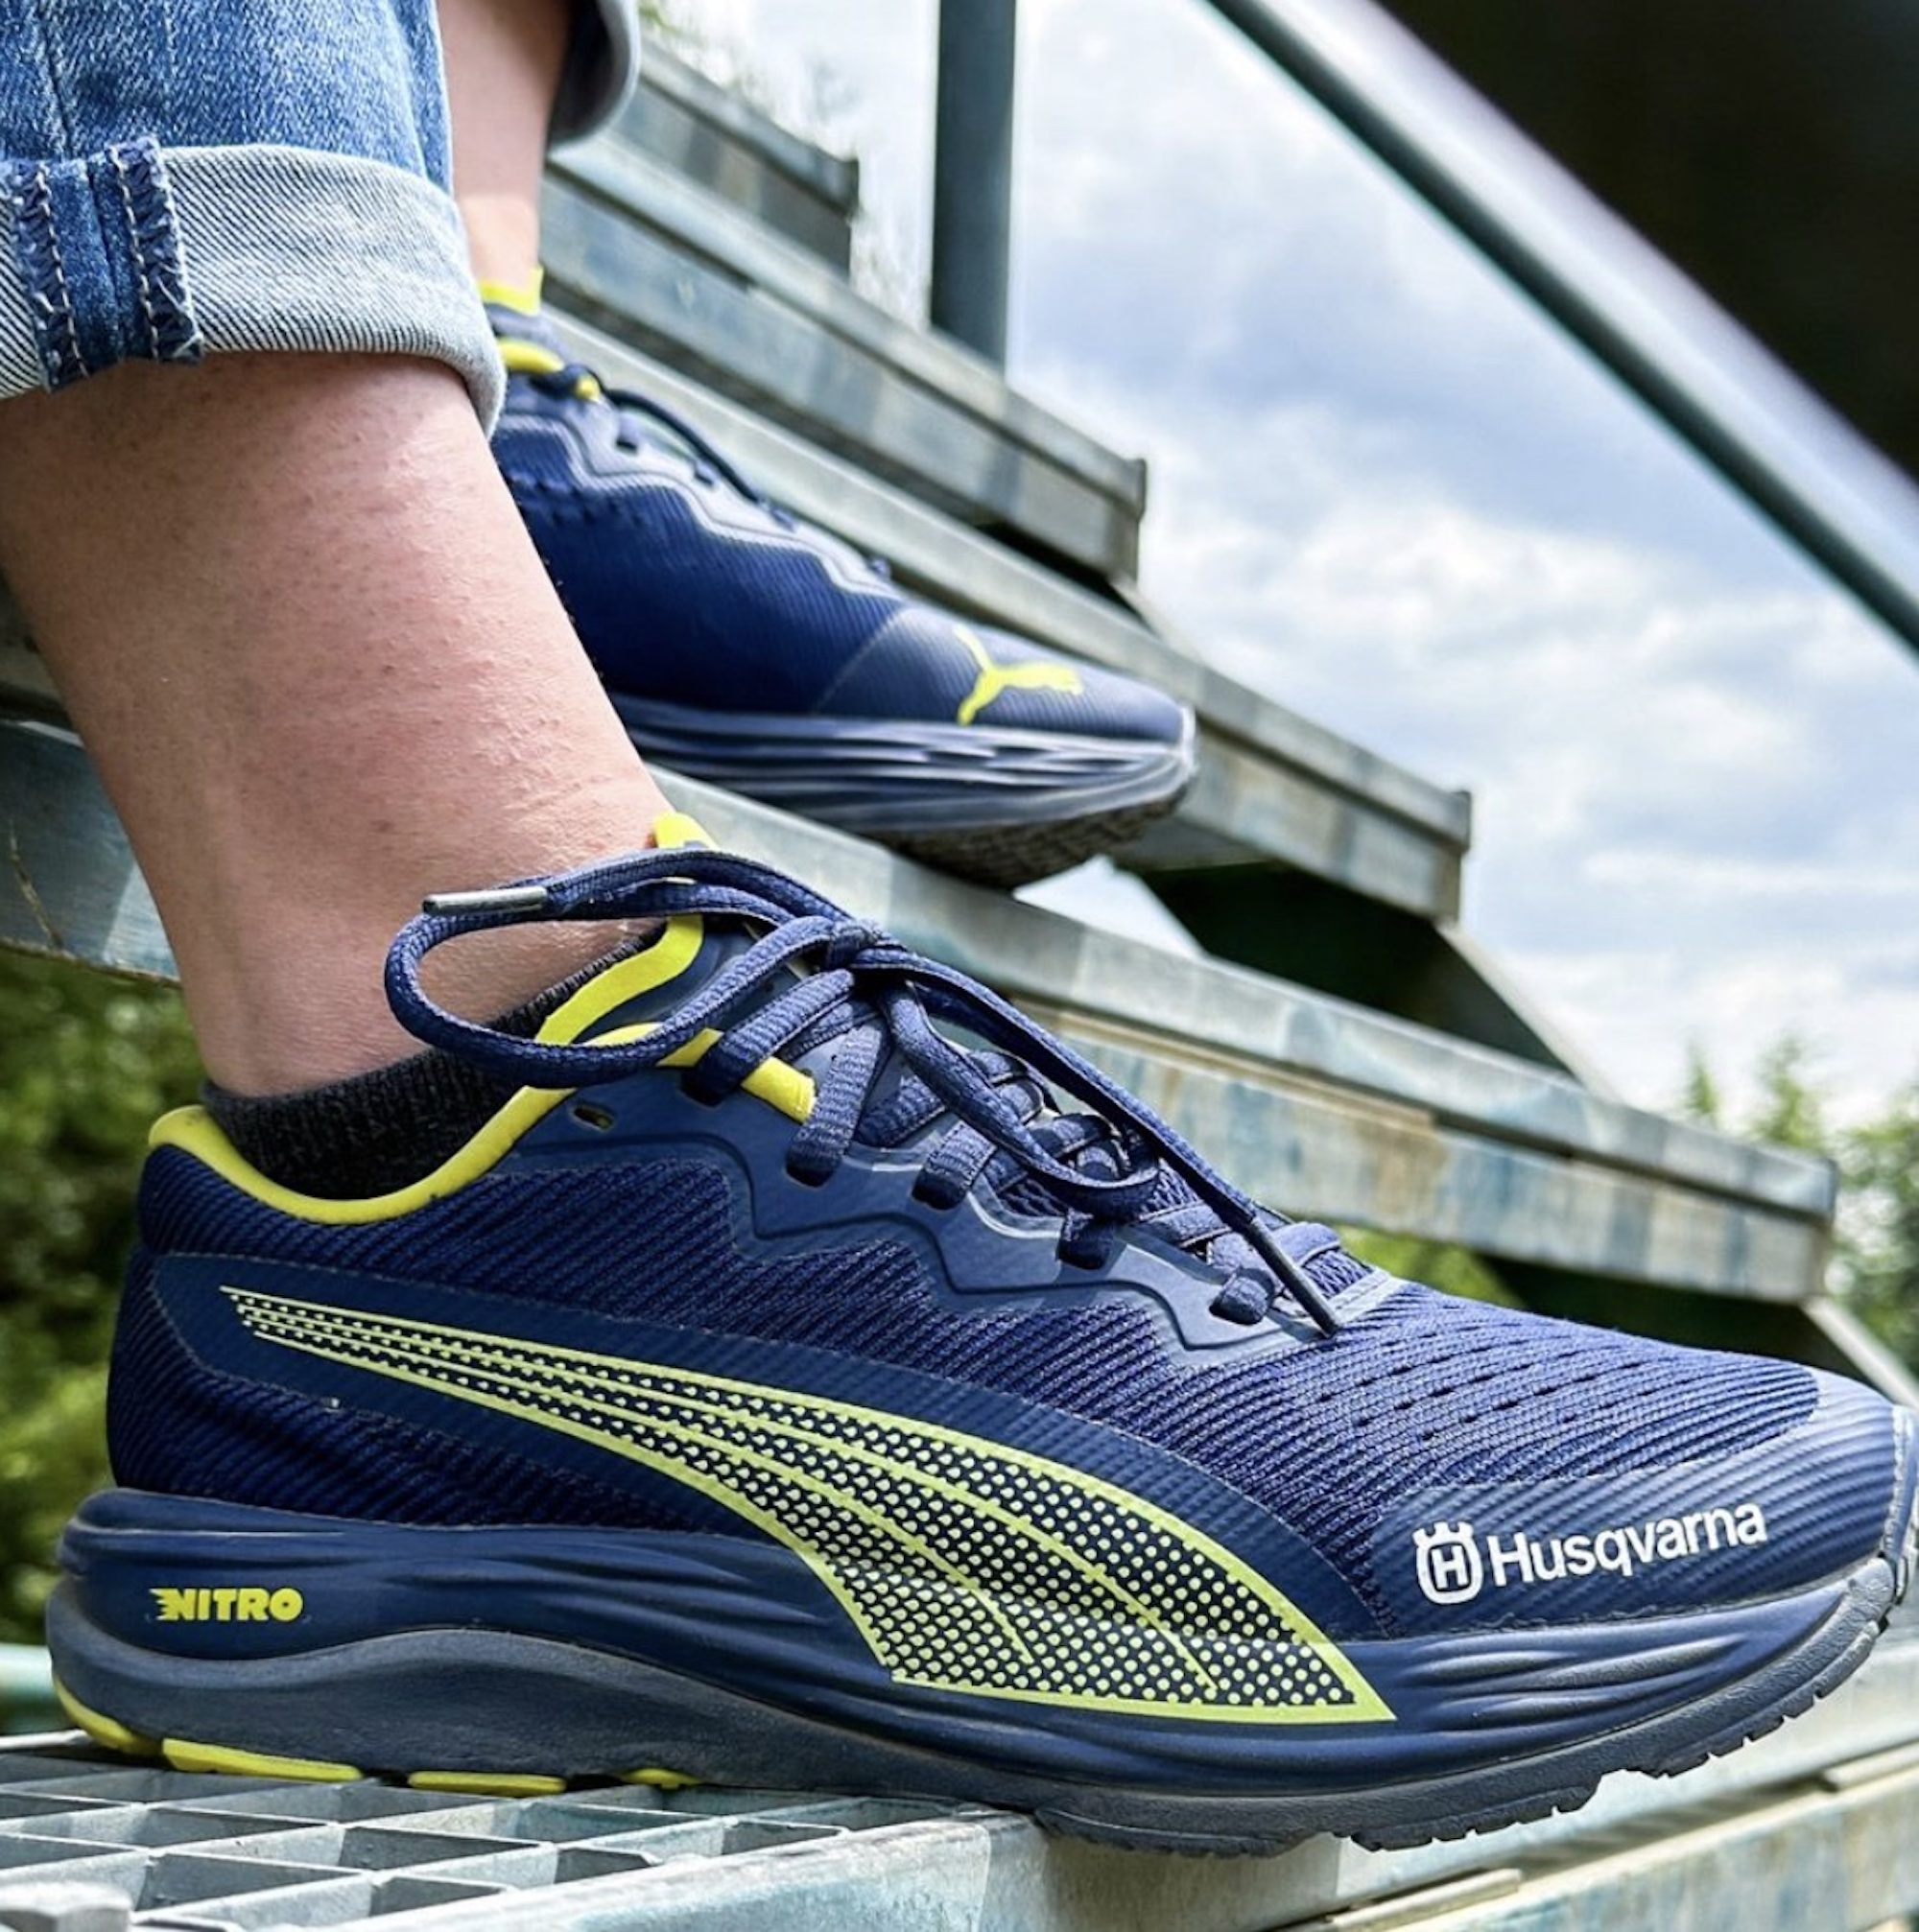 A view of the PUMA Nitro 2 running shoes, currently carrying a Husqvarna scheme. Available at select participating dealerships. Media sourced from Husqvarna.